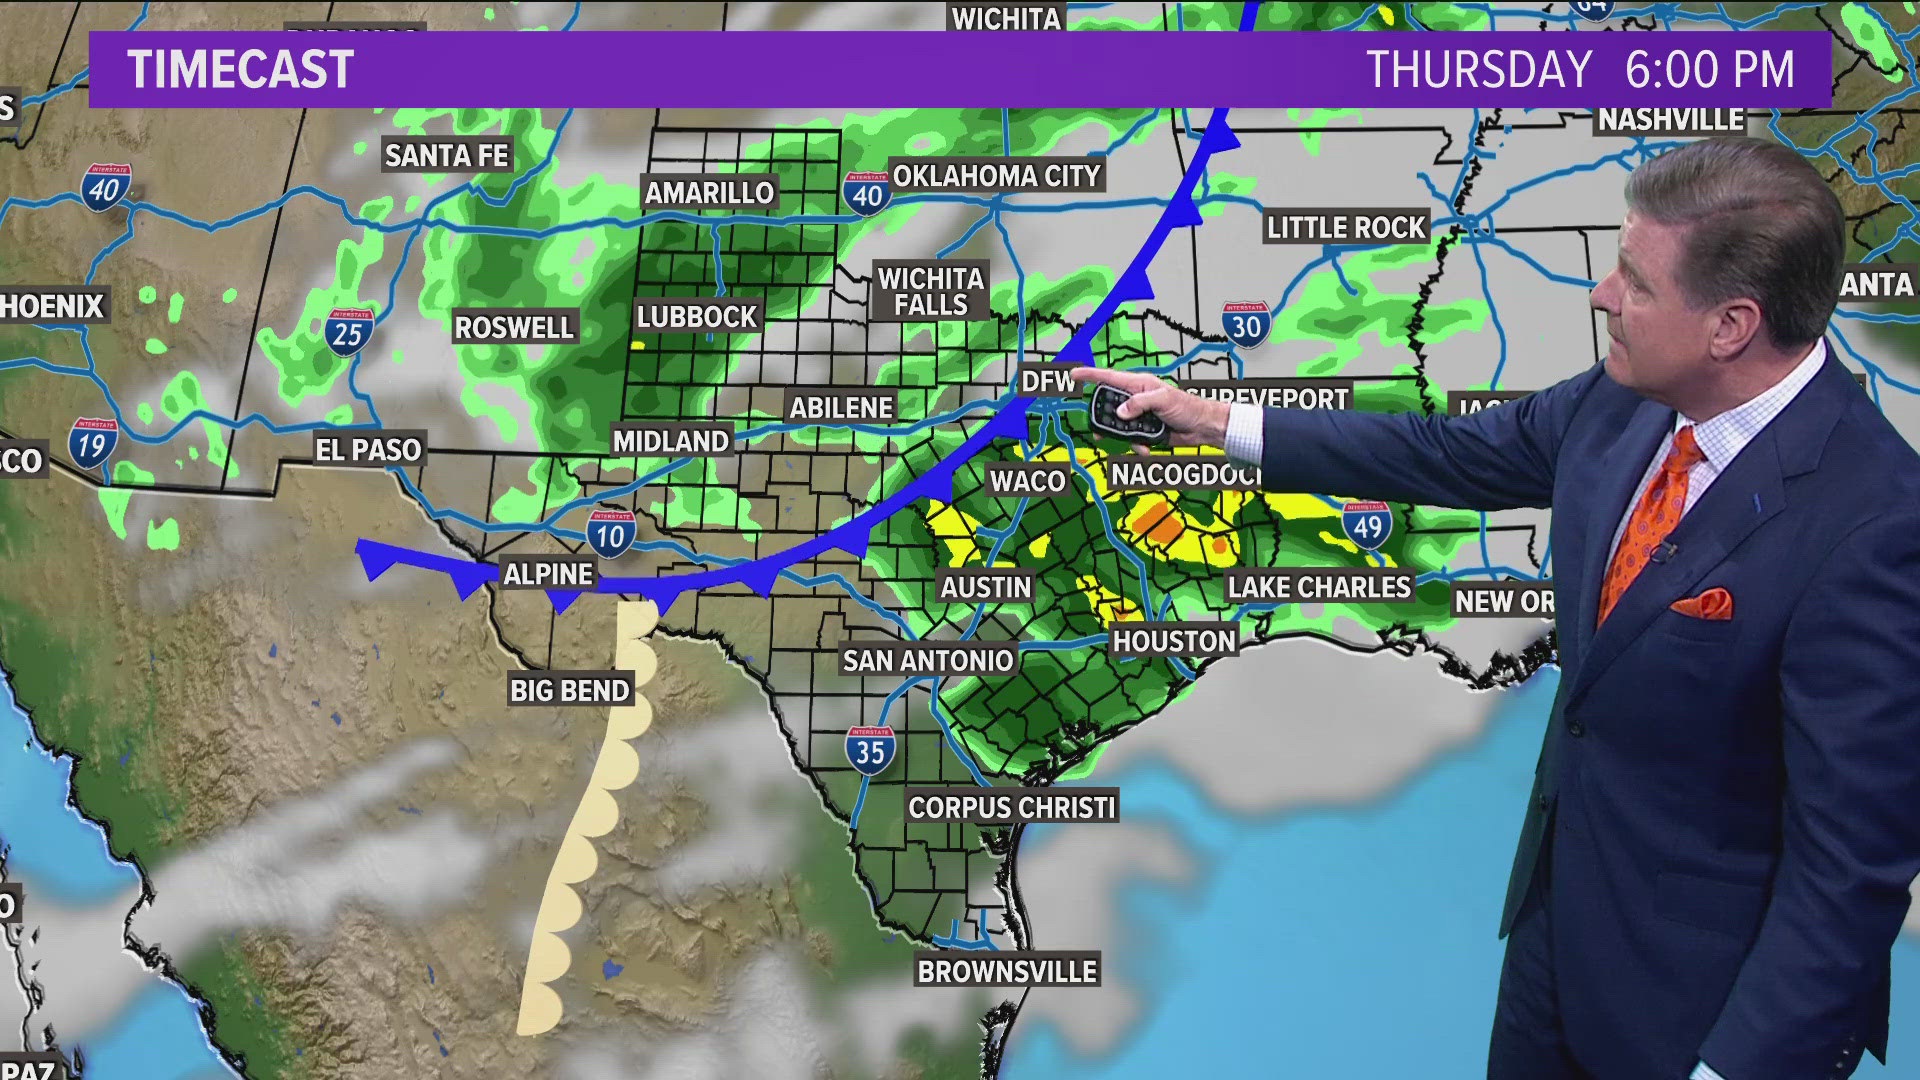 Our next best chance of rain in the forecast is overnight Wednesday and through the day on Thursday.